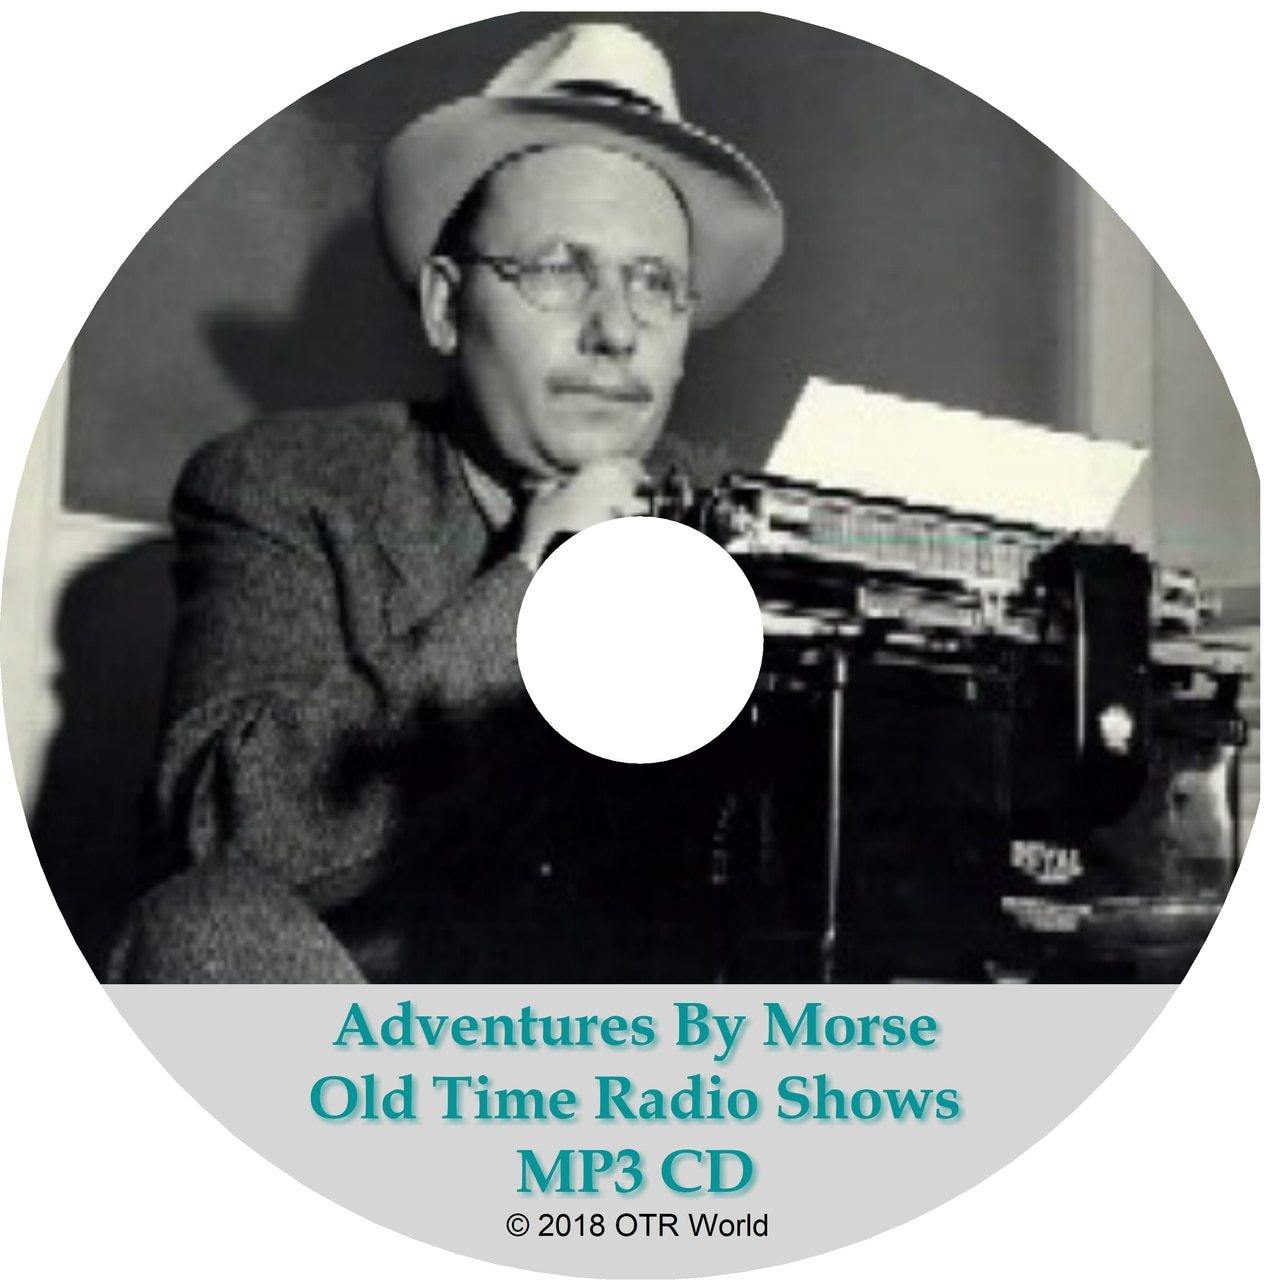 Adventures By Morse Old Time Radio Shows 55 Episodes On MP3 CD - OTR World